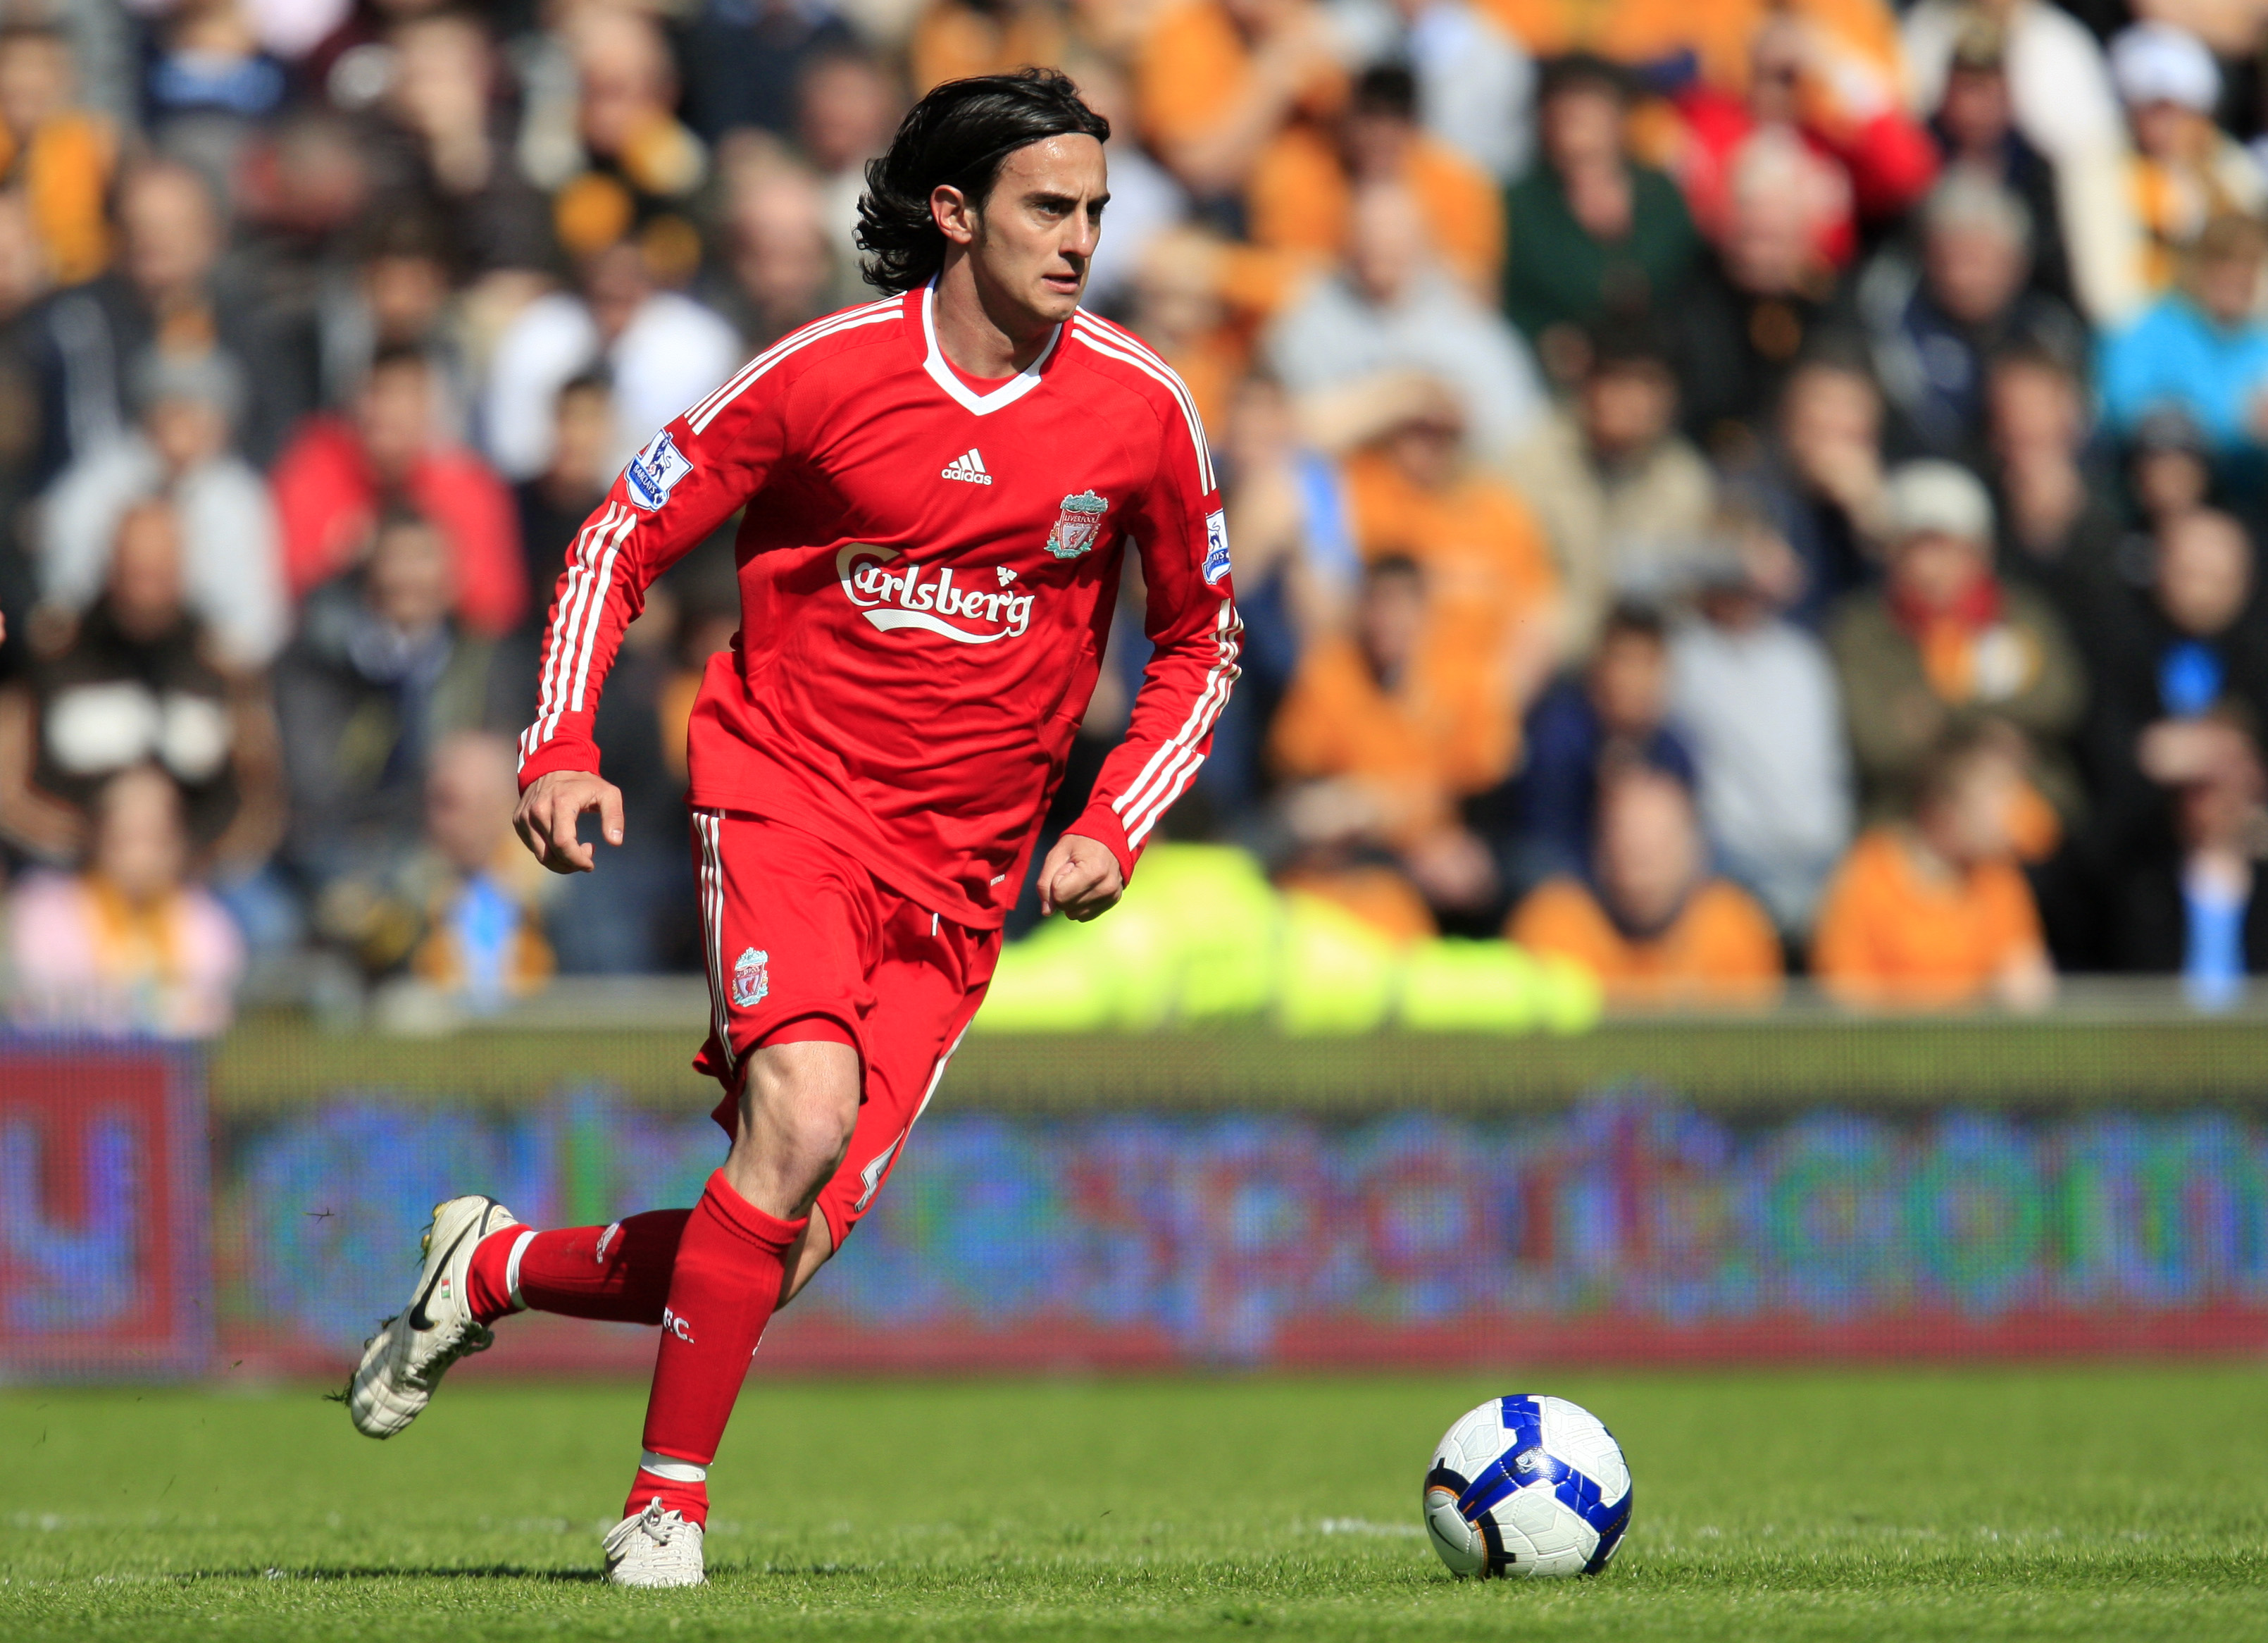 HULL, ENGLAND - MAY 9:  Alberto Aquilani of Liverpool during the Barclays Premier League match between Hull City and Liverpool at the KC Stadium on May 9, 2010 in Hull, England. (Photo by Jed Leicester/Getty Images)